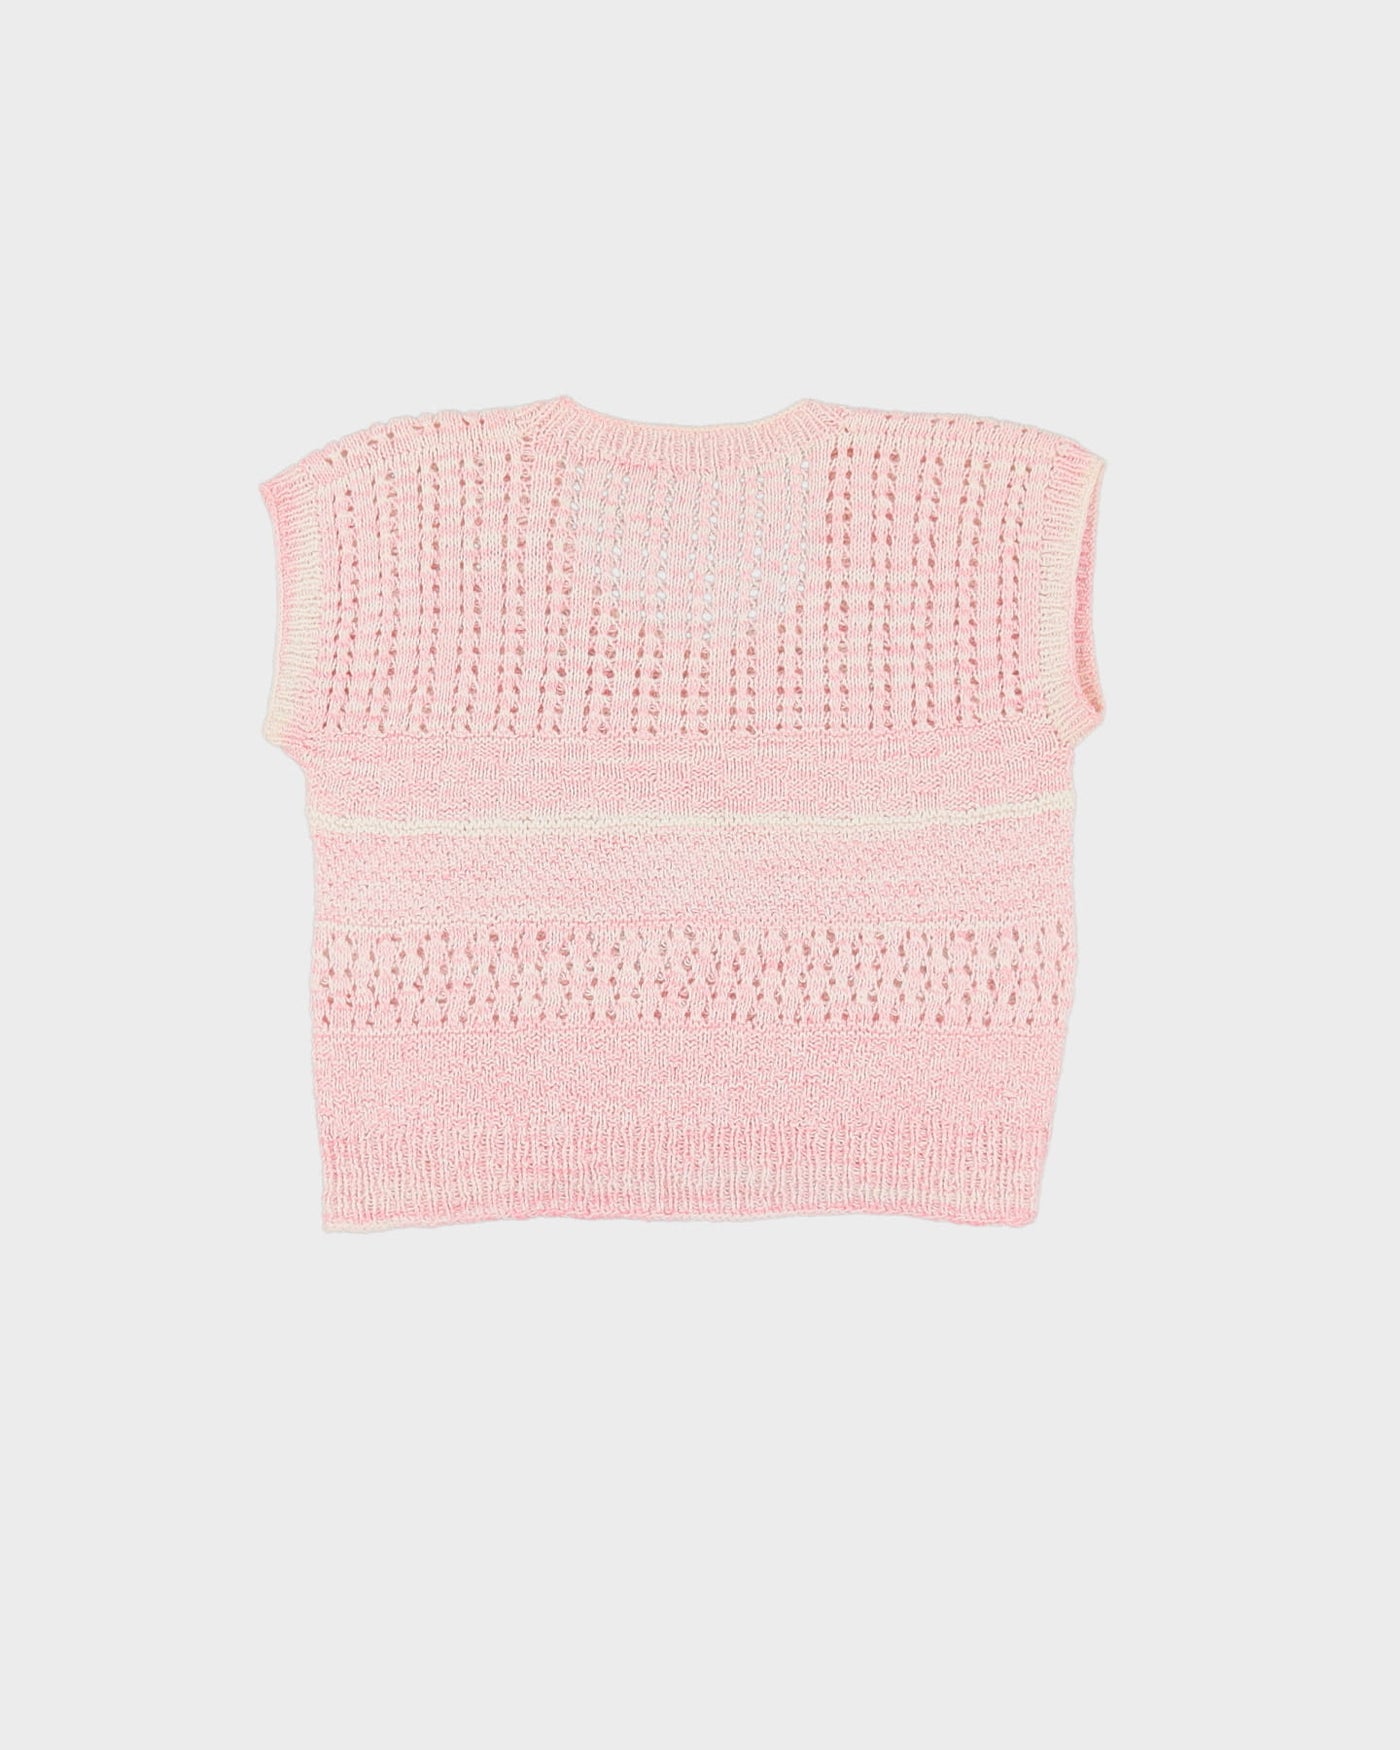 Vintage 1980s Pink Knitted Short Sleeve Top - S / M